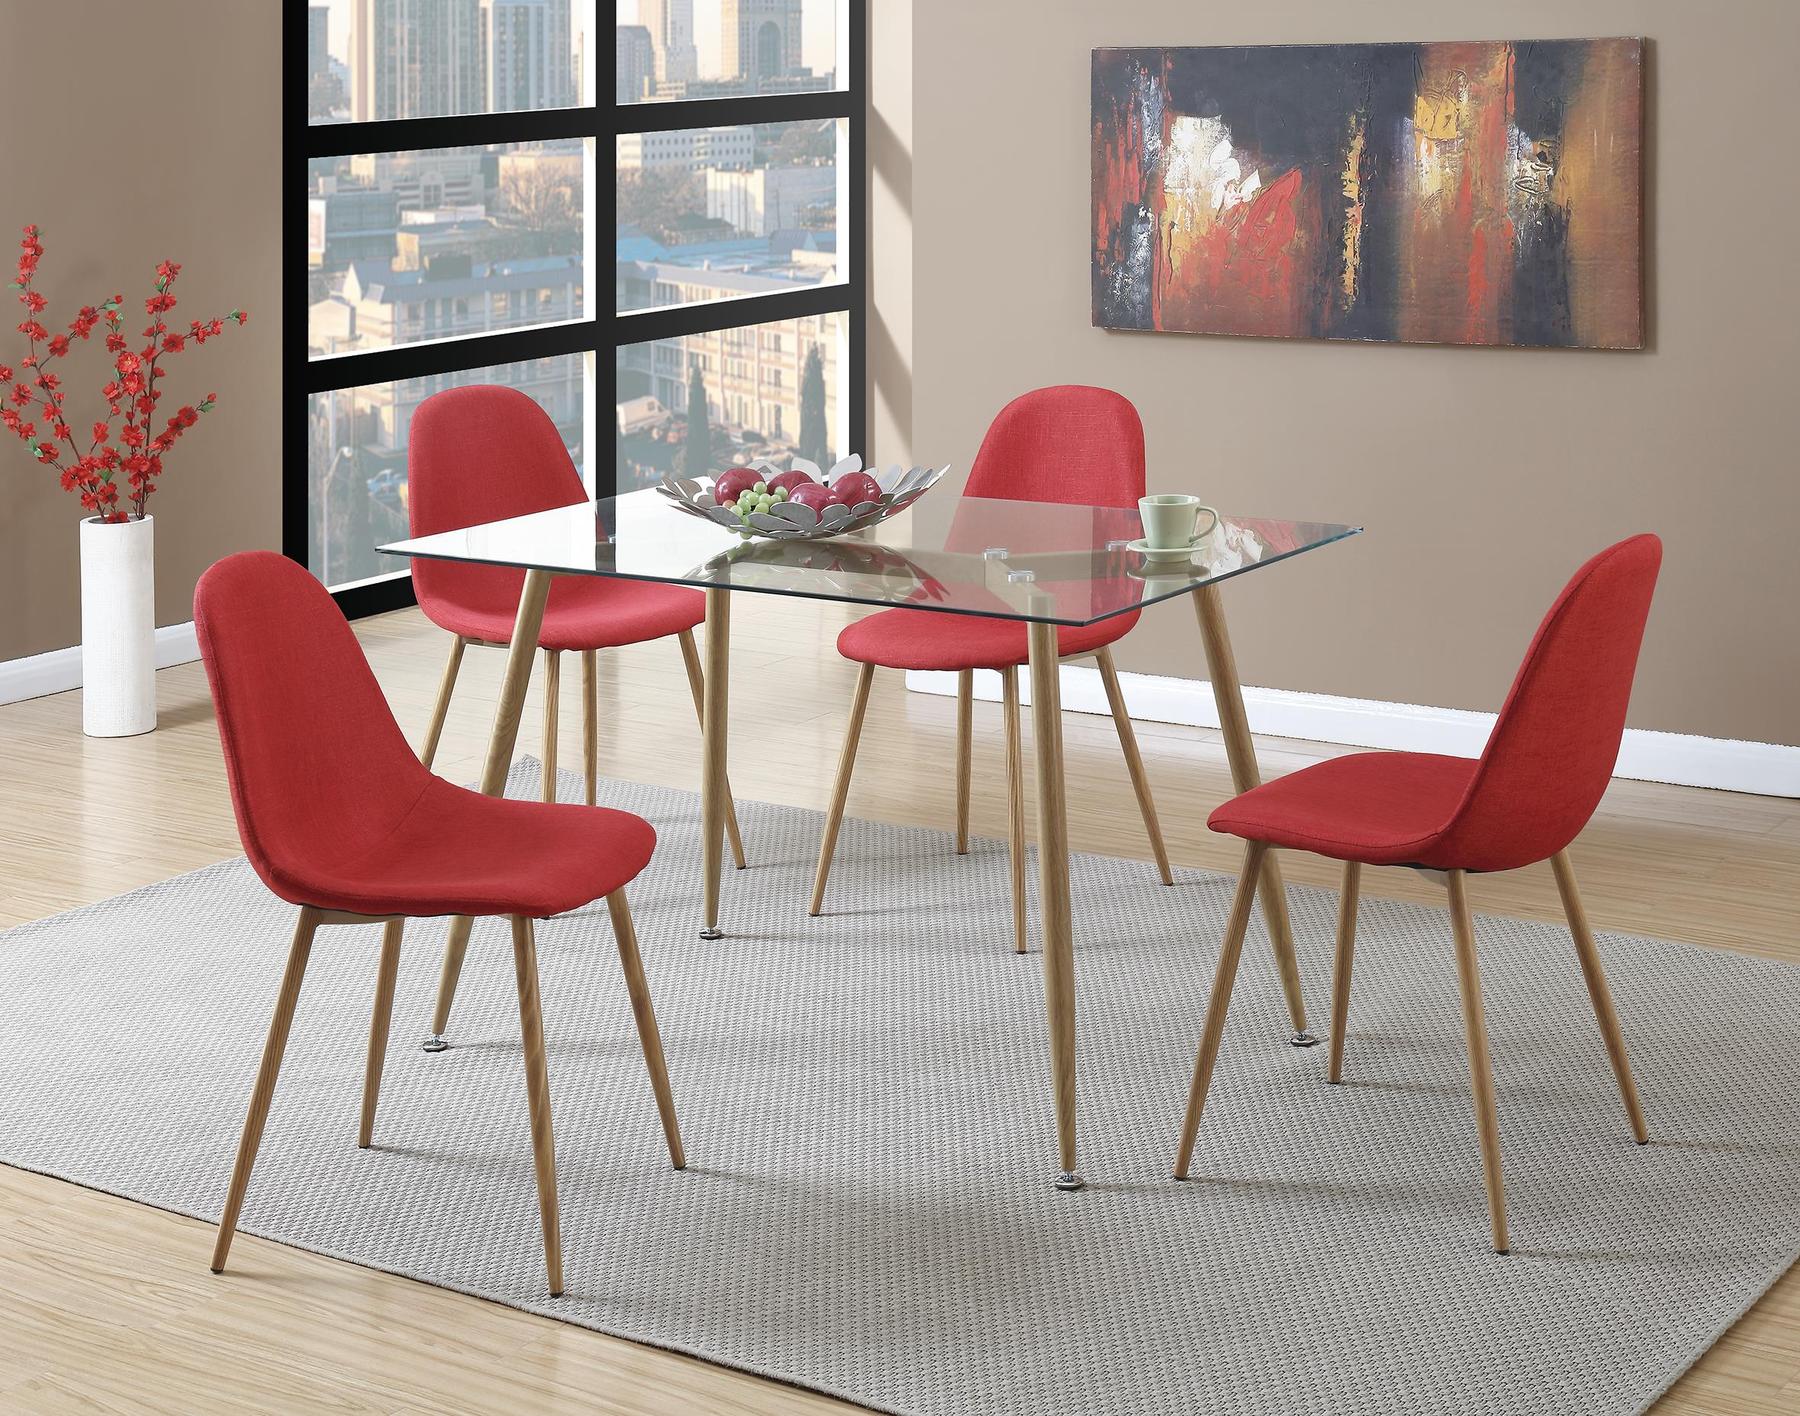 P2457 Red Table 4 Chairs F2457 1743 Poundex Dining Room Sets Comfyco Furniture